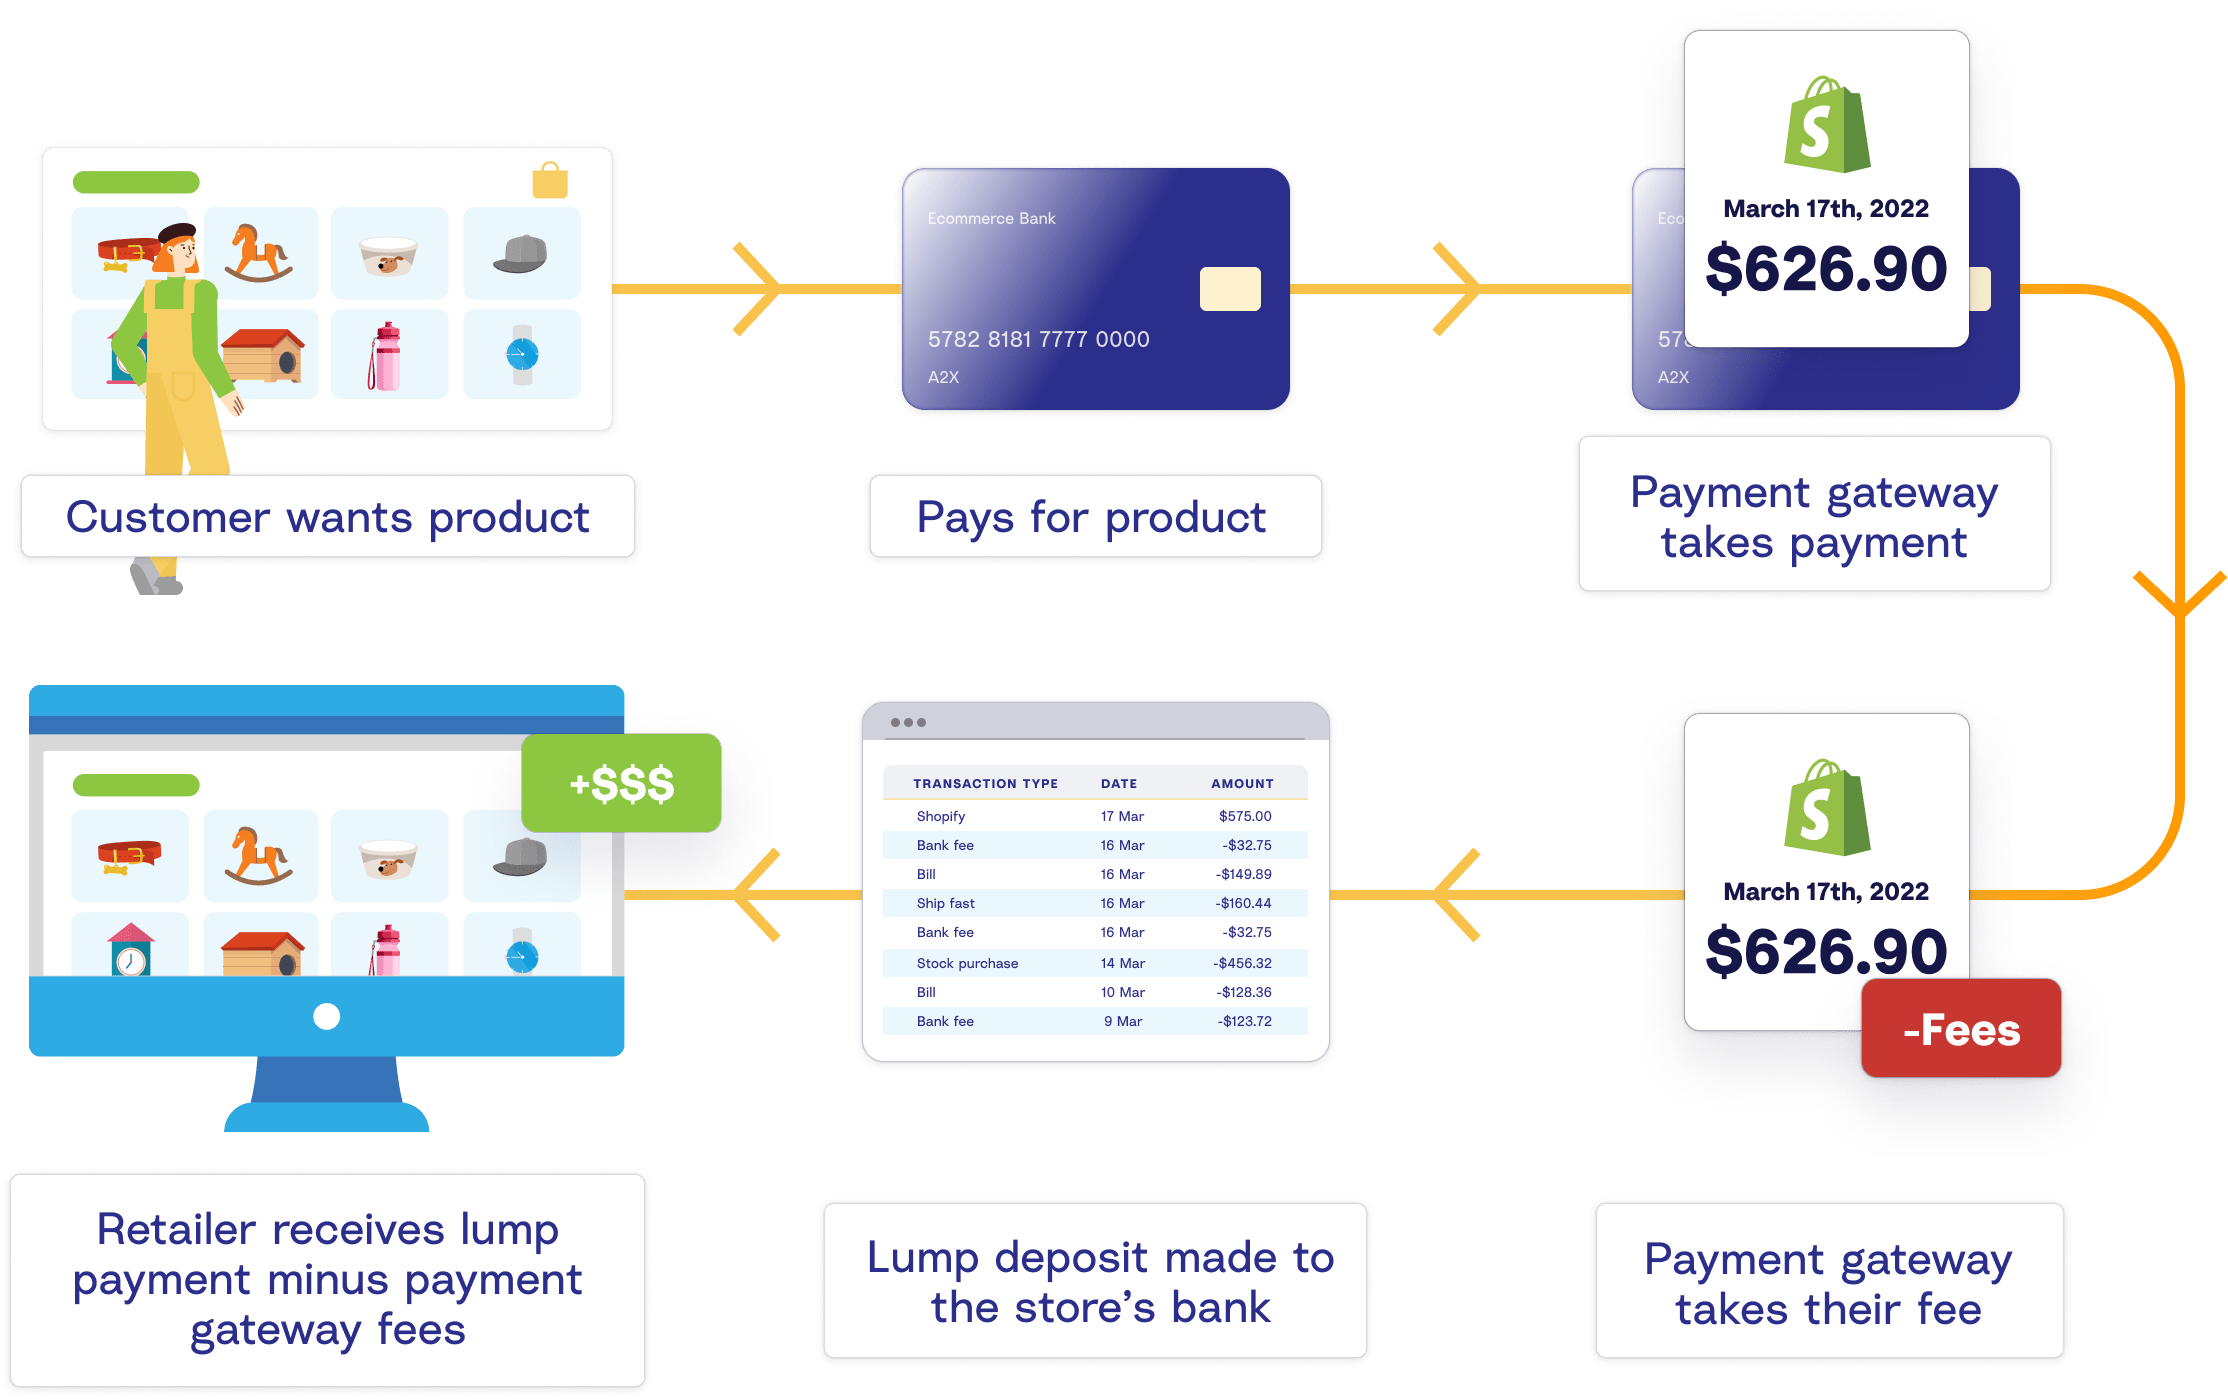 a flow chart demonstrating how ecommerce works: a customer wants a product, purchases it, a payment gateway processes the payment, the payment gateway takes the fee, a lump deposit is made to the sellers bank account minus payment gateway fees